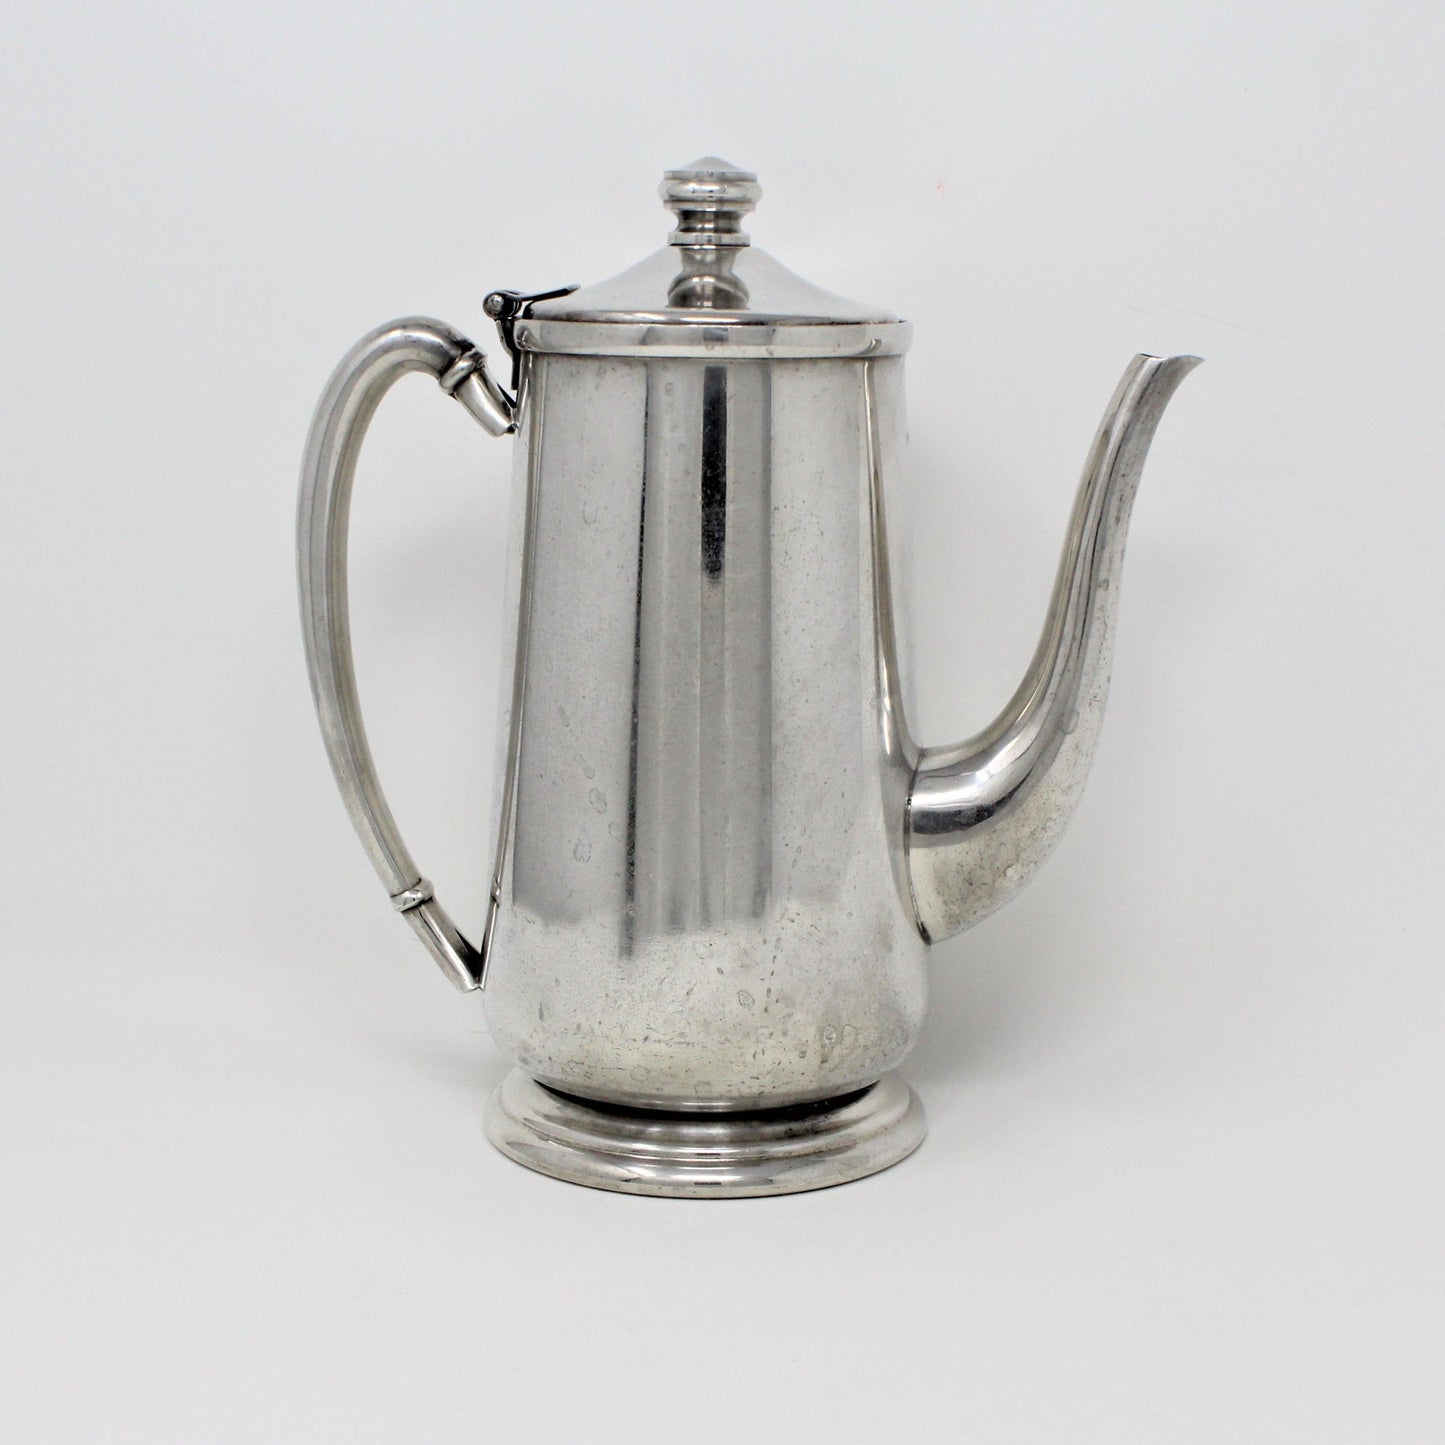 Coffee Pot, International Silver, Stainless 18/10,  5403, Vintage